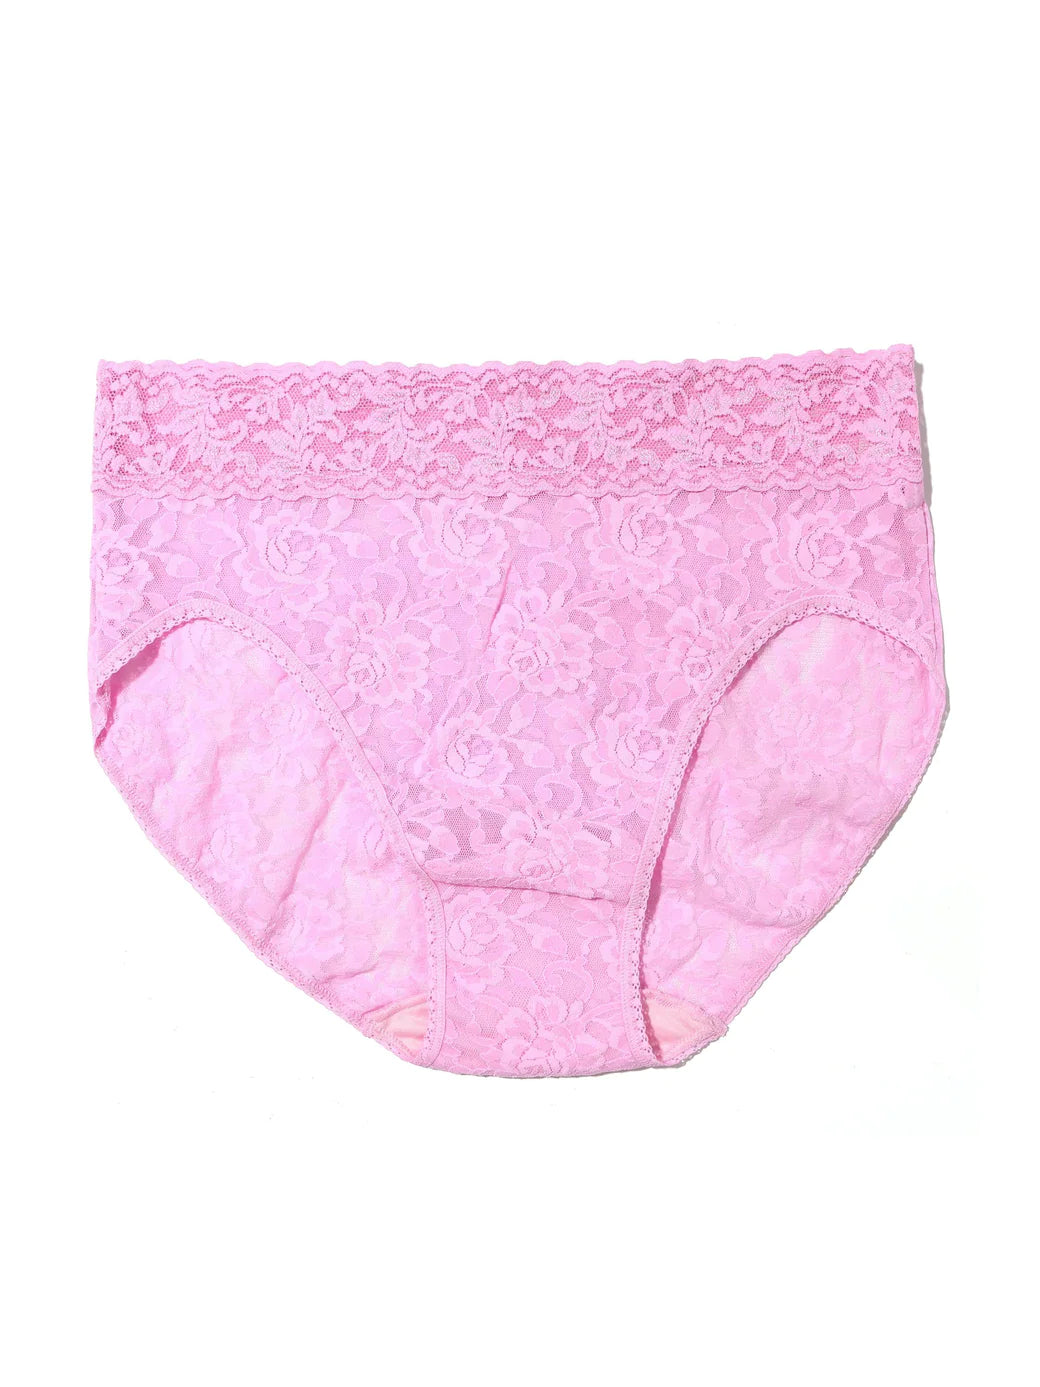 Hanky Panky French Brief - Cotton Candy